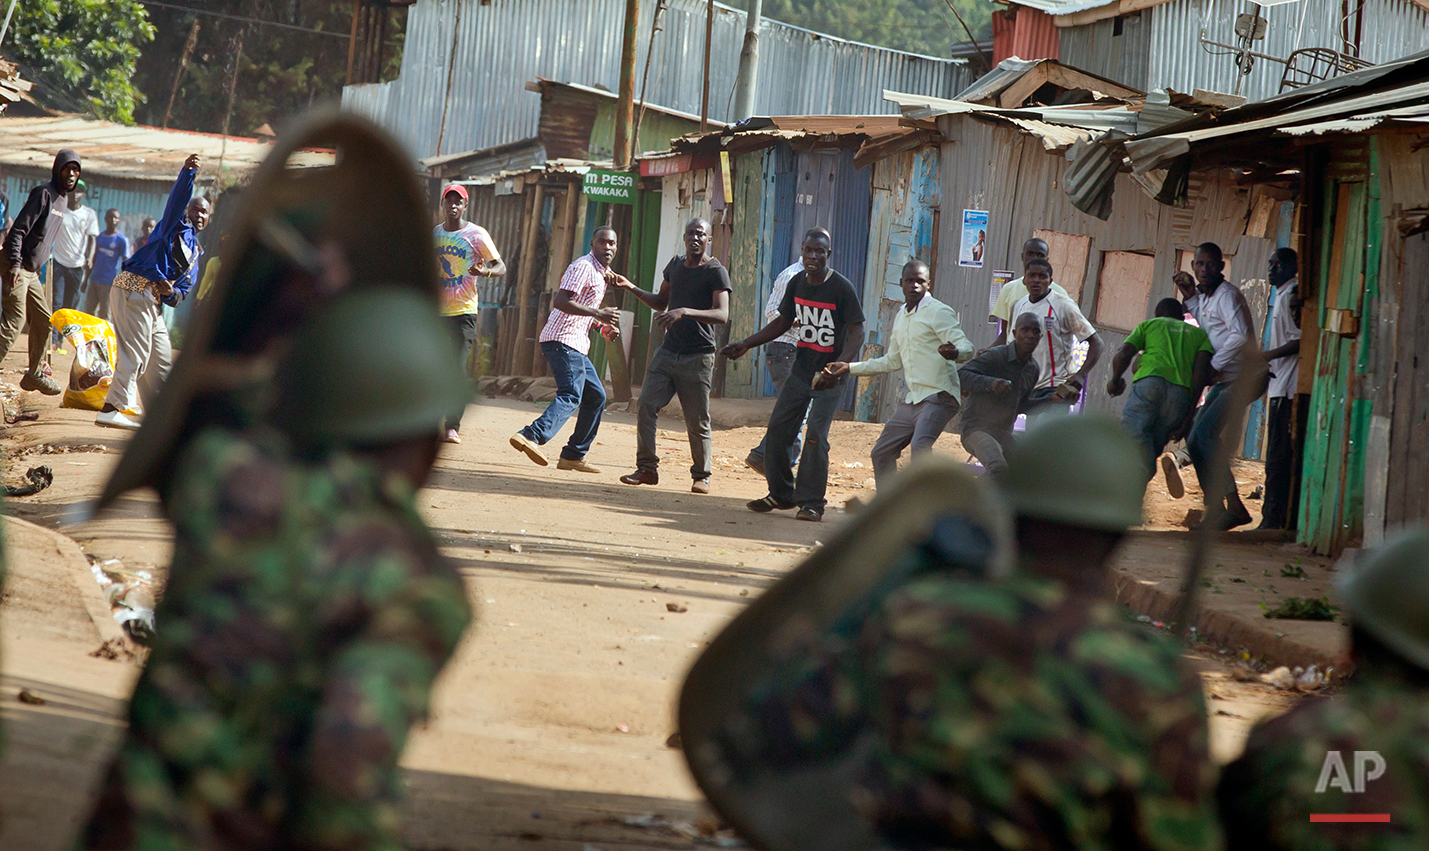  Opposition protesters throw rocks as they engage in running battles with police firing tear gas, in the Kibera slum of Nairobi, Kenya Monday, May 23, 2016. Kenya's police shot, beat and tear gassed opposition demonstrators across the country who tri